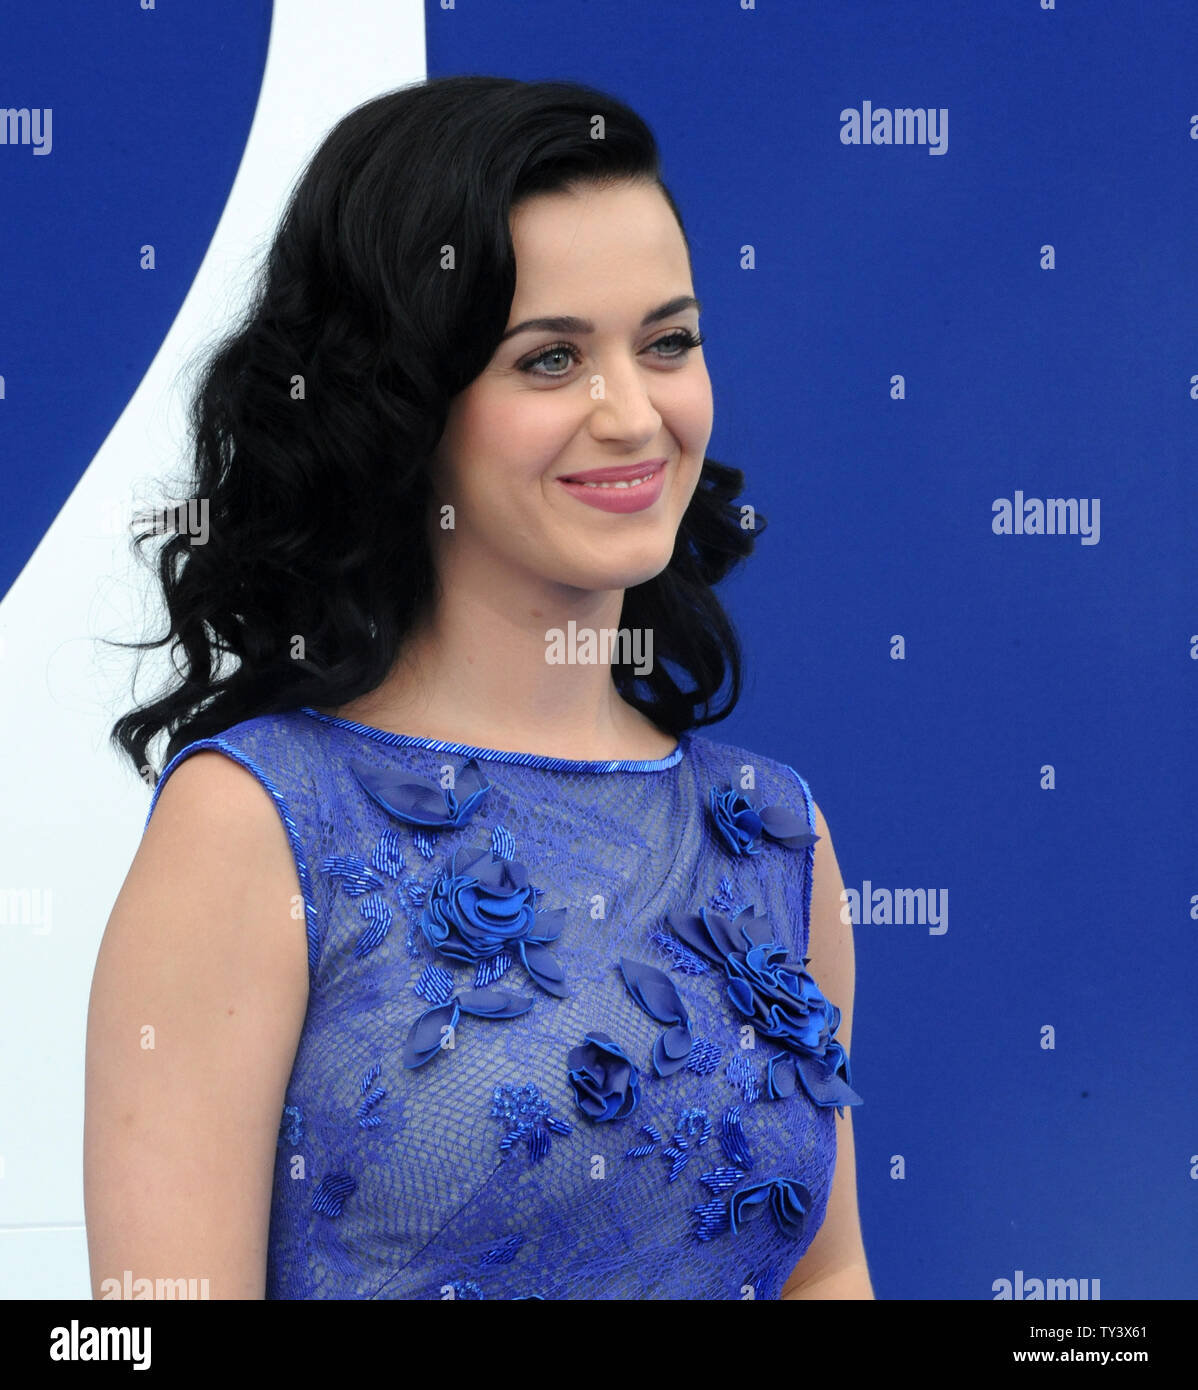 Singer and actress Katy Perry, the voice of Smurfette in the motion picture animated comedy 'The Smurfs 2', attends the premiere of the film at the Regency Village Theatre, in the Westwood section of Los Angeles on July 28, 2013. The Smurfs join forces with their human friends to rescue Smurfette, who has been kidnapped by Gargamel since she knows a secret spell that can turn the evil sorcerer's newest creation - creatures called the Naughties - into real Smurfs.  UPI/Jim Ruymen Stock Photo